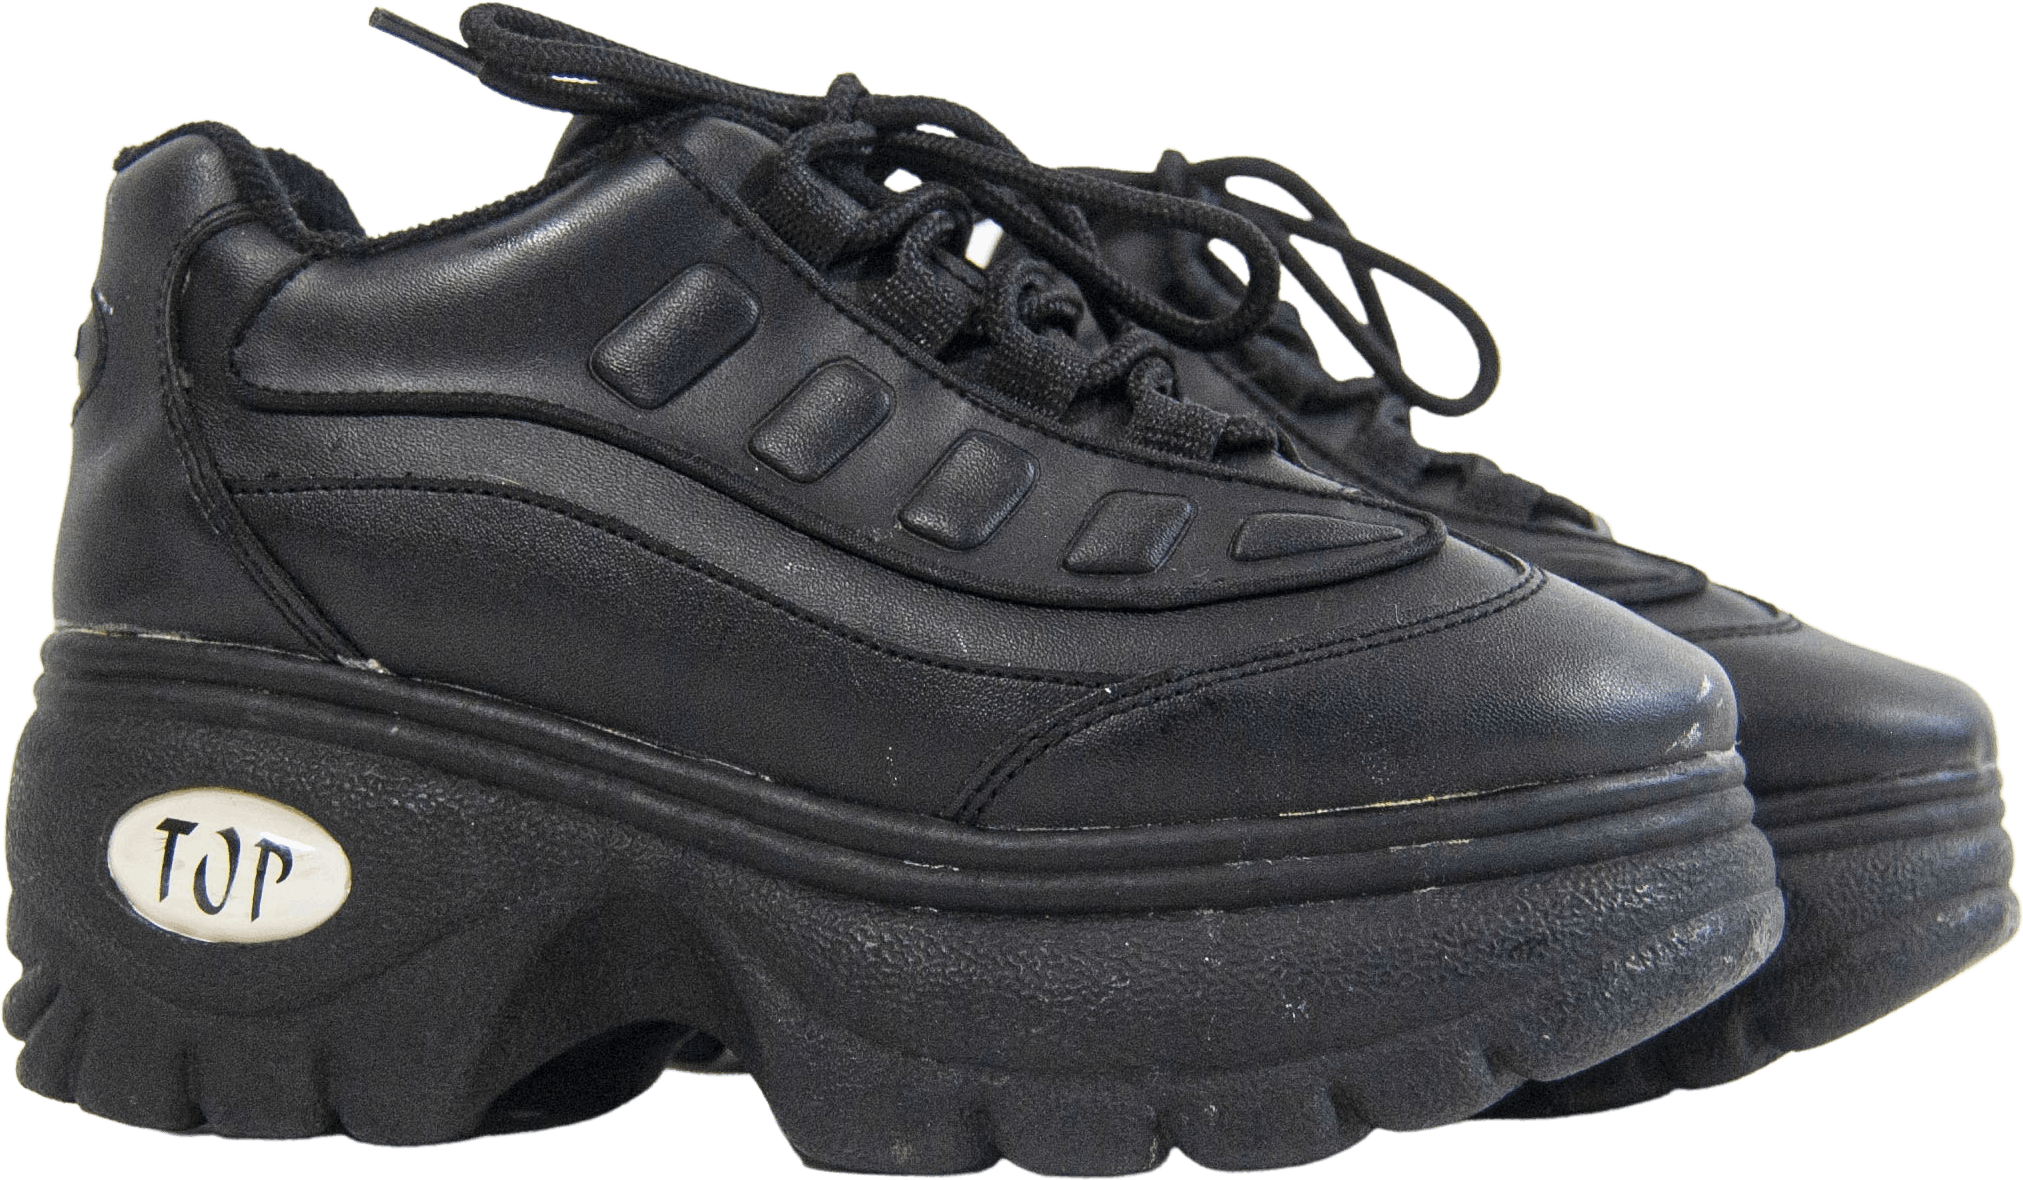 Vintage 90's Black Chunky Club Kid Sneakers by Top | Shop THRILLING